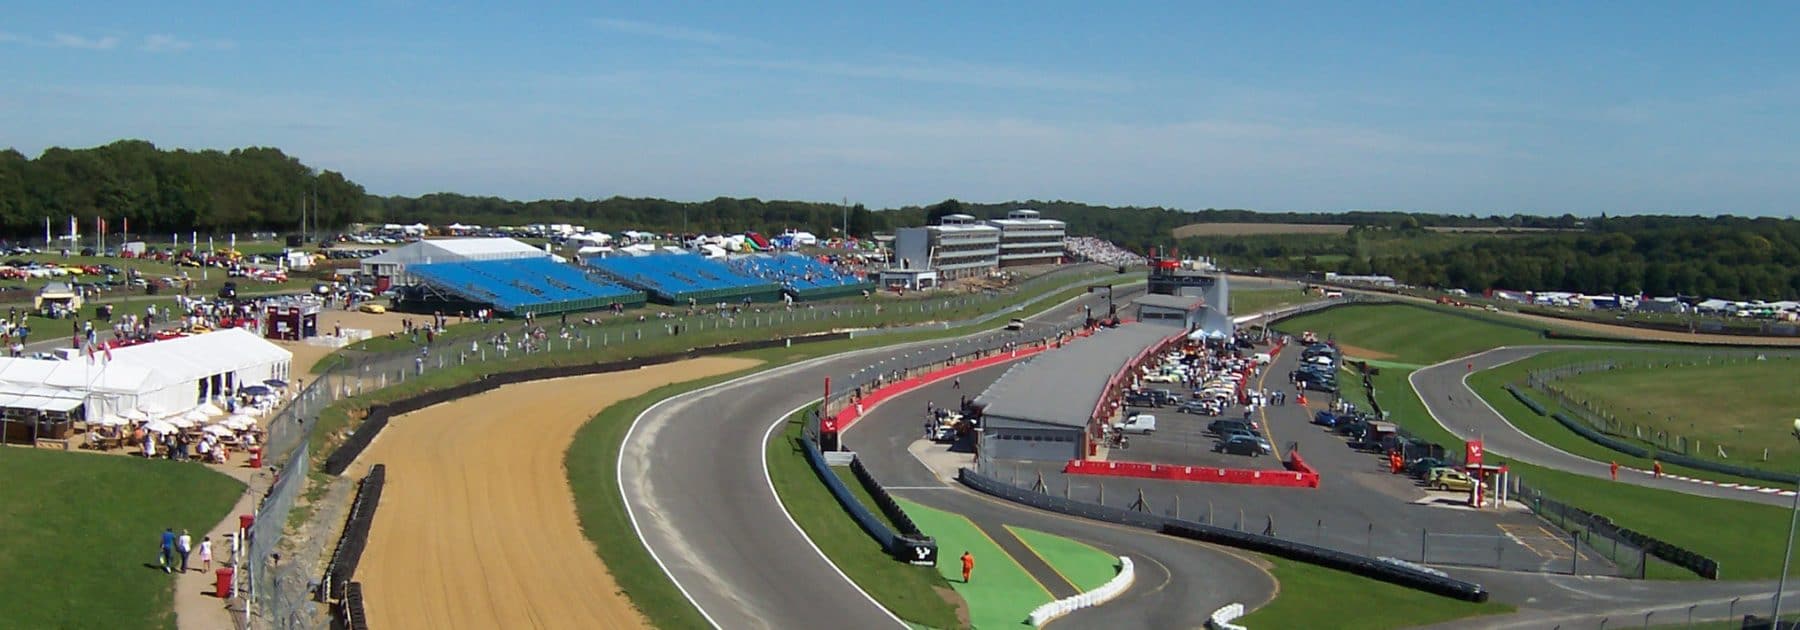 British Touring Car Championship Final Day at Brands Hatch